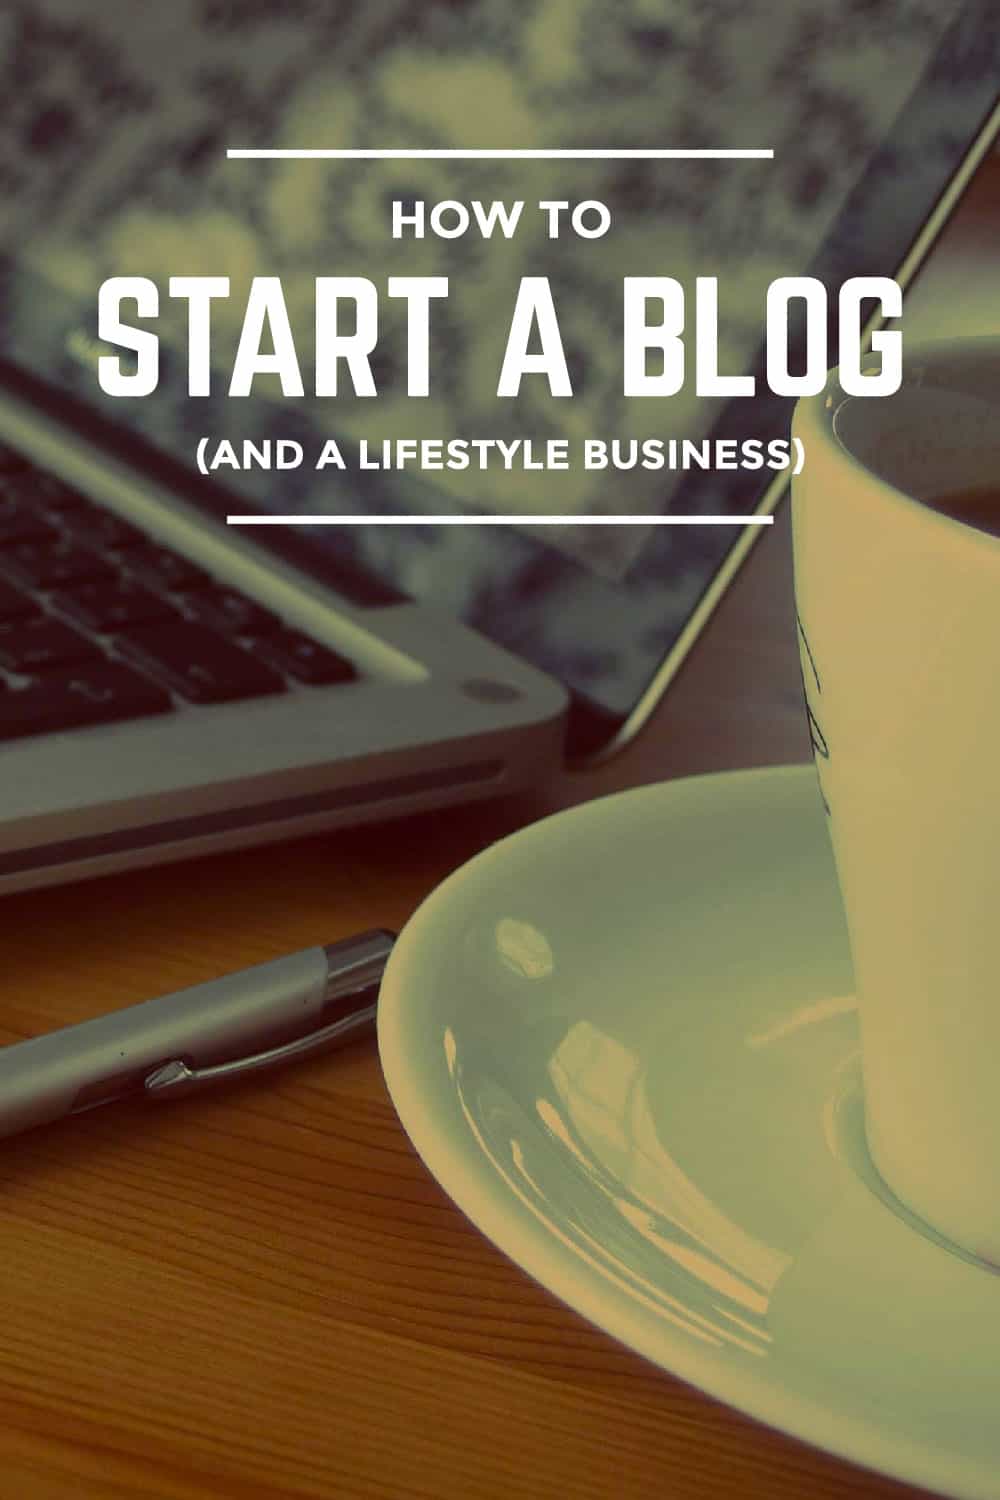 How to Start a Blog and a Lifestyle Business